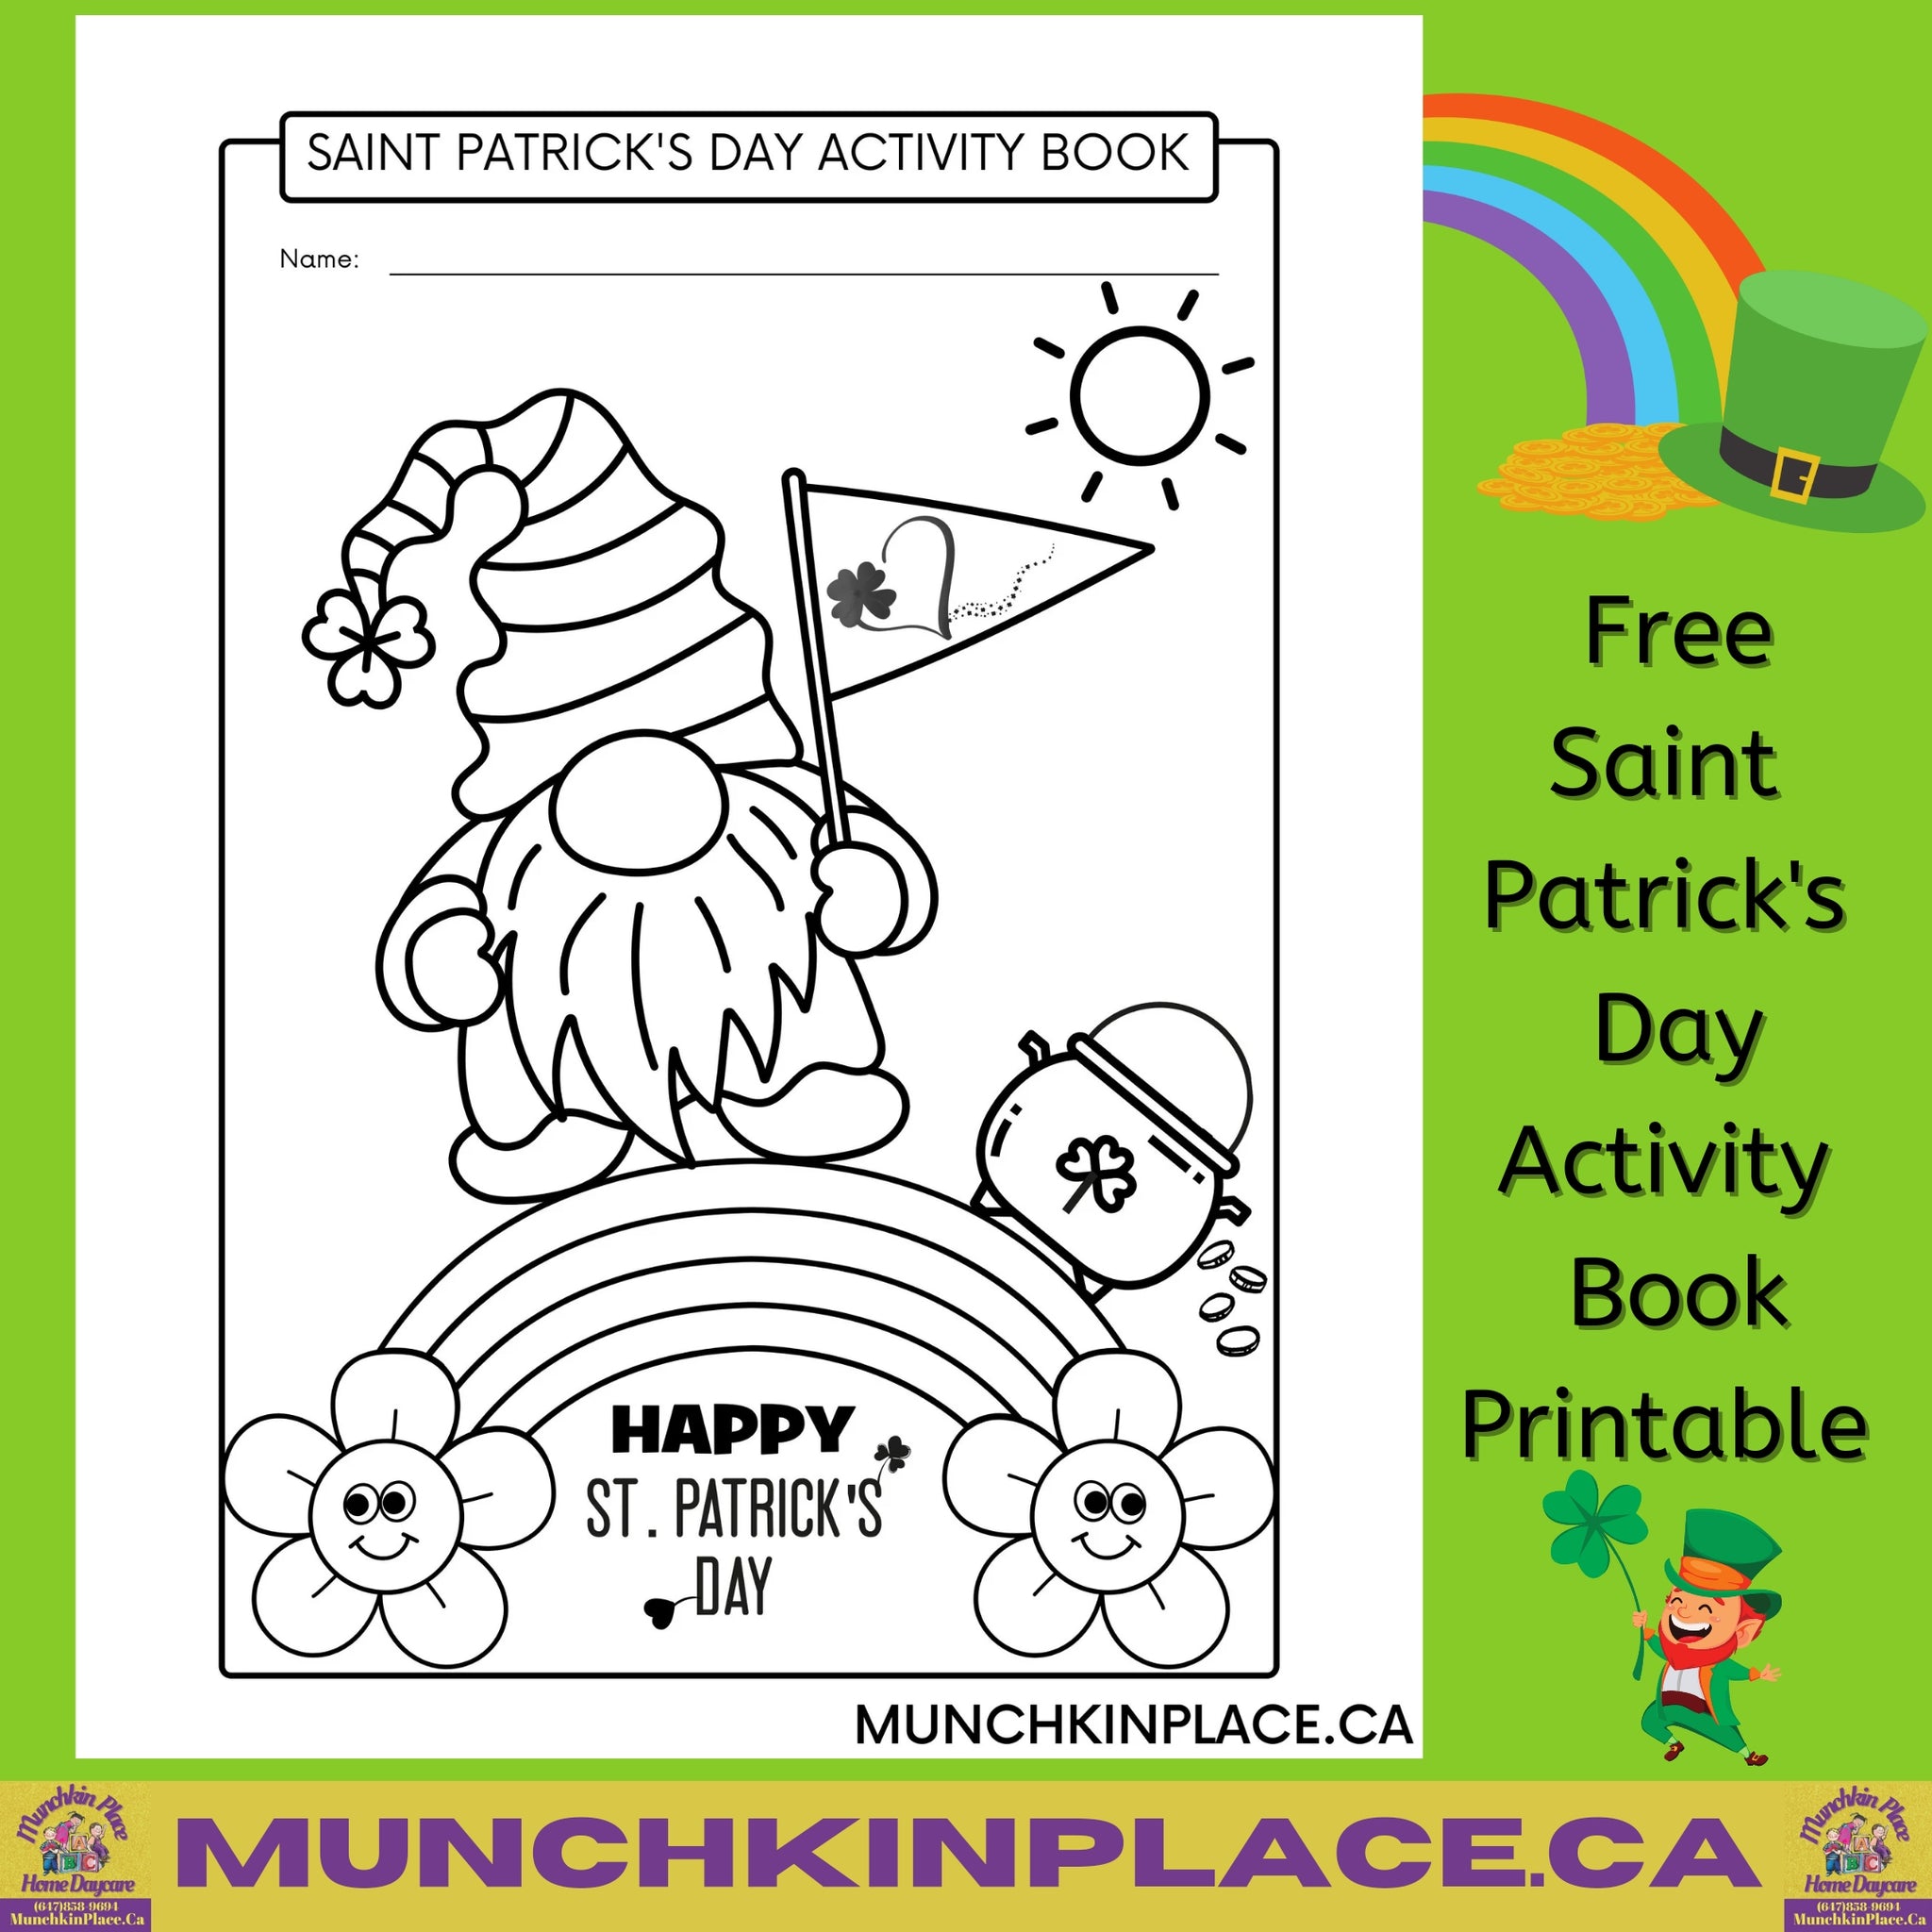 Saint Patrick's Day Free Coloring Page Activity Book Printable